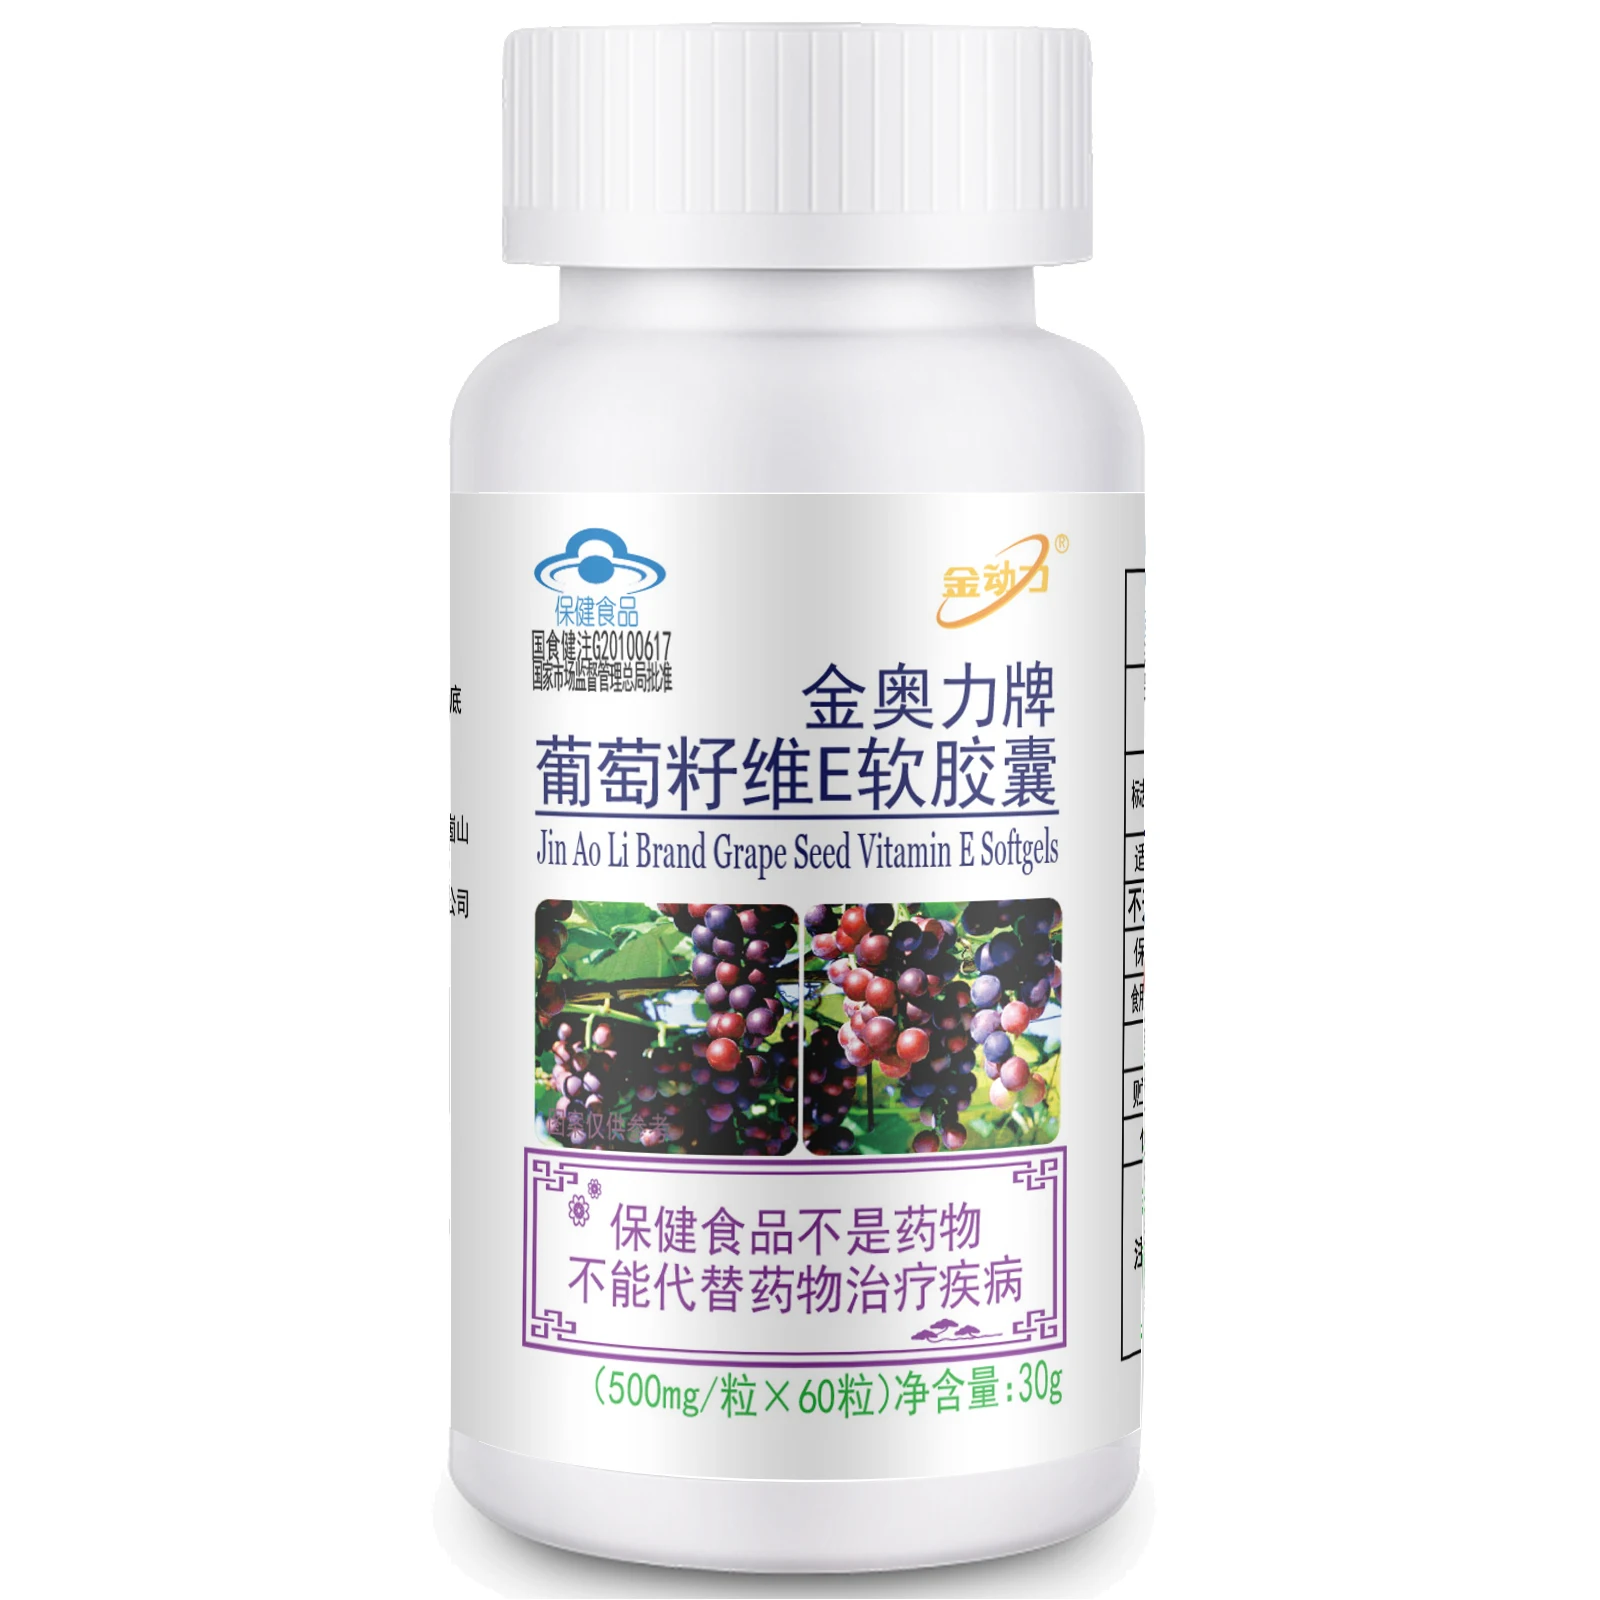 

3Bottle Grape Seed Extract Proanthocyanidins Vitamin E Softgel 500mg x 180Counts Antioxidant and Immune Support